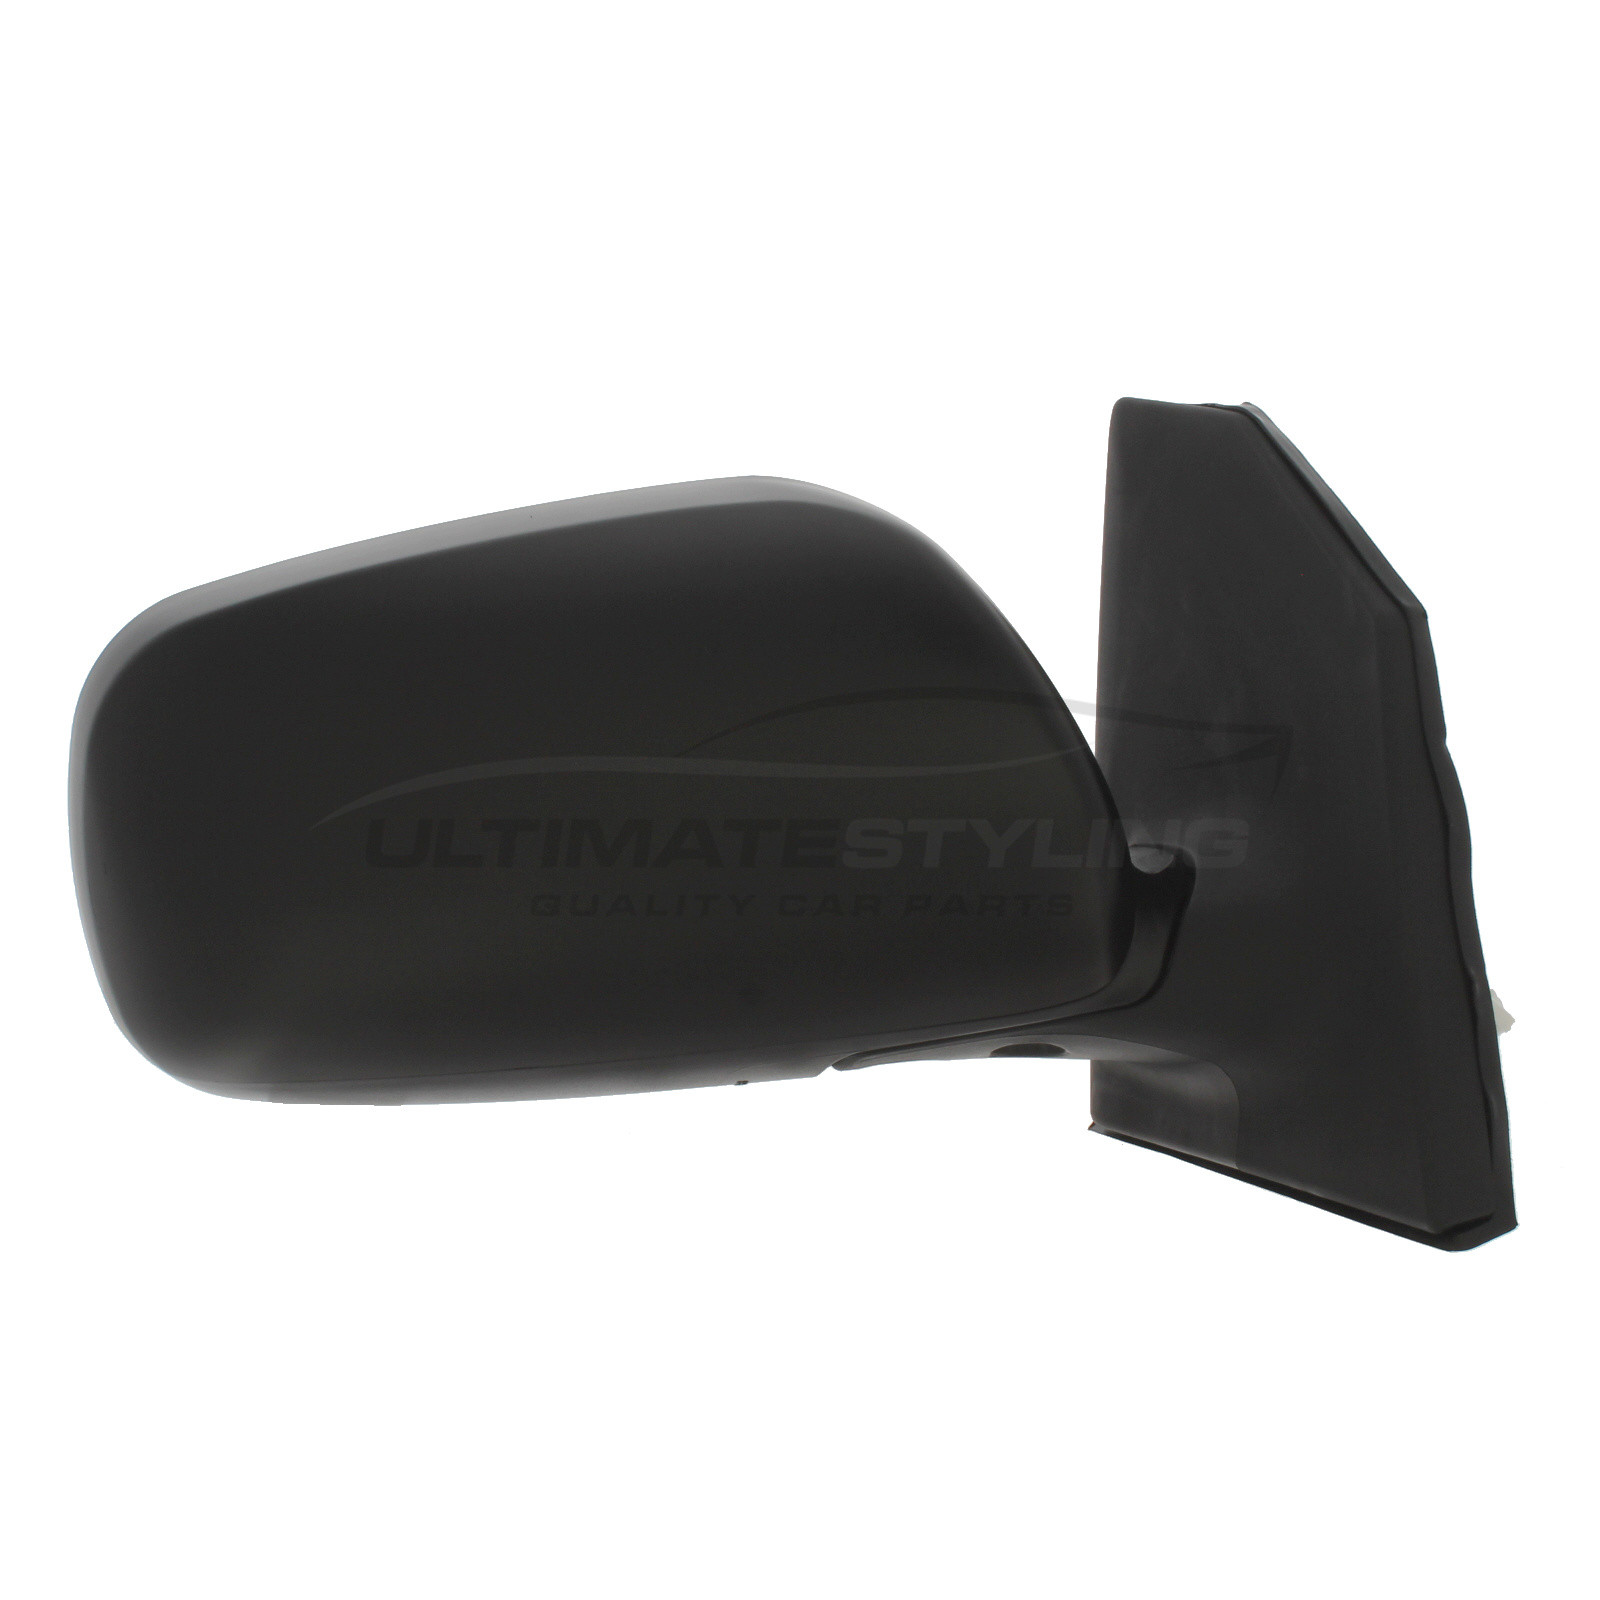 Toyota Corolla Wing Mirror / Door Mirror - Drivers Side (RH) - Electric adjustment - Heated Glass - Paintable - Black